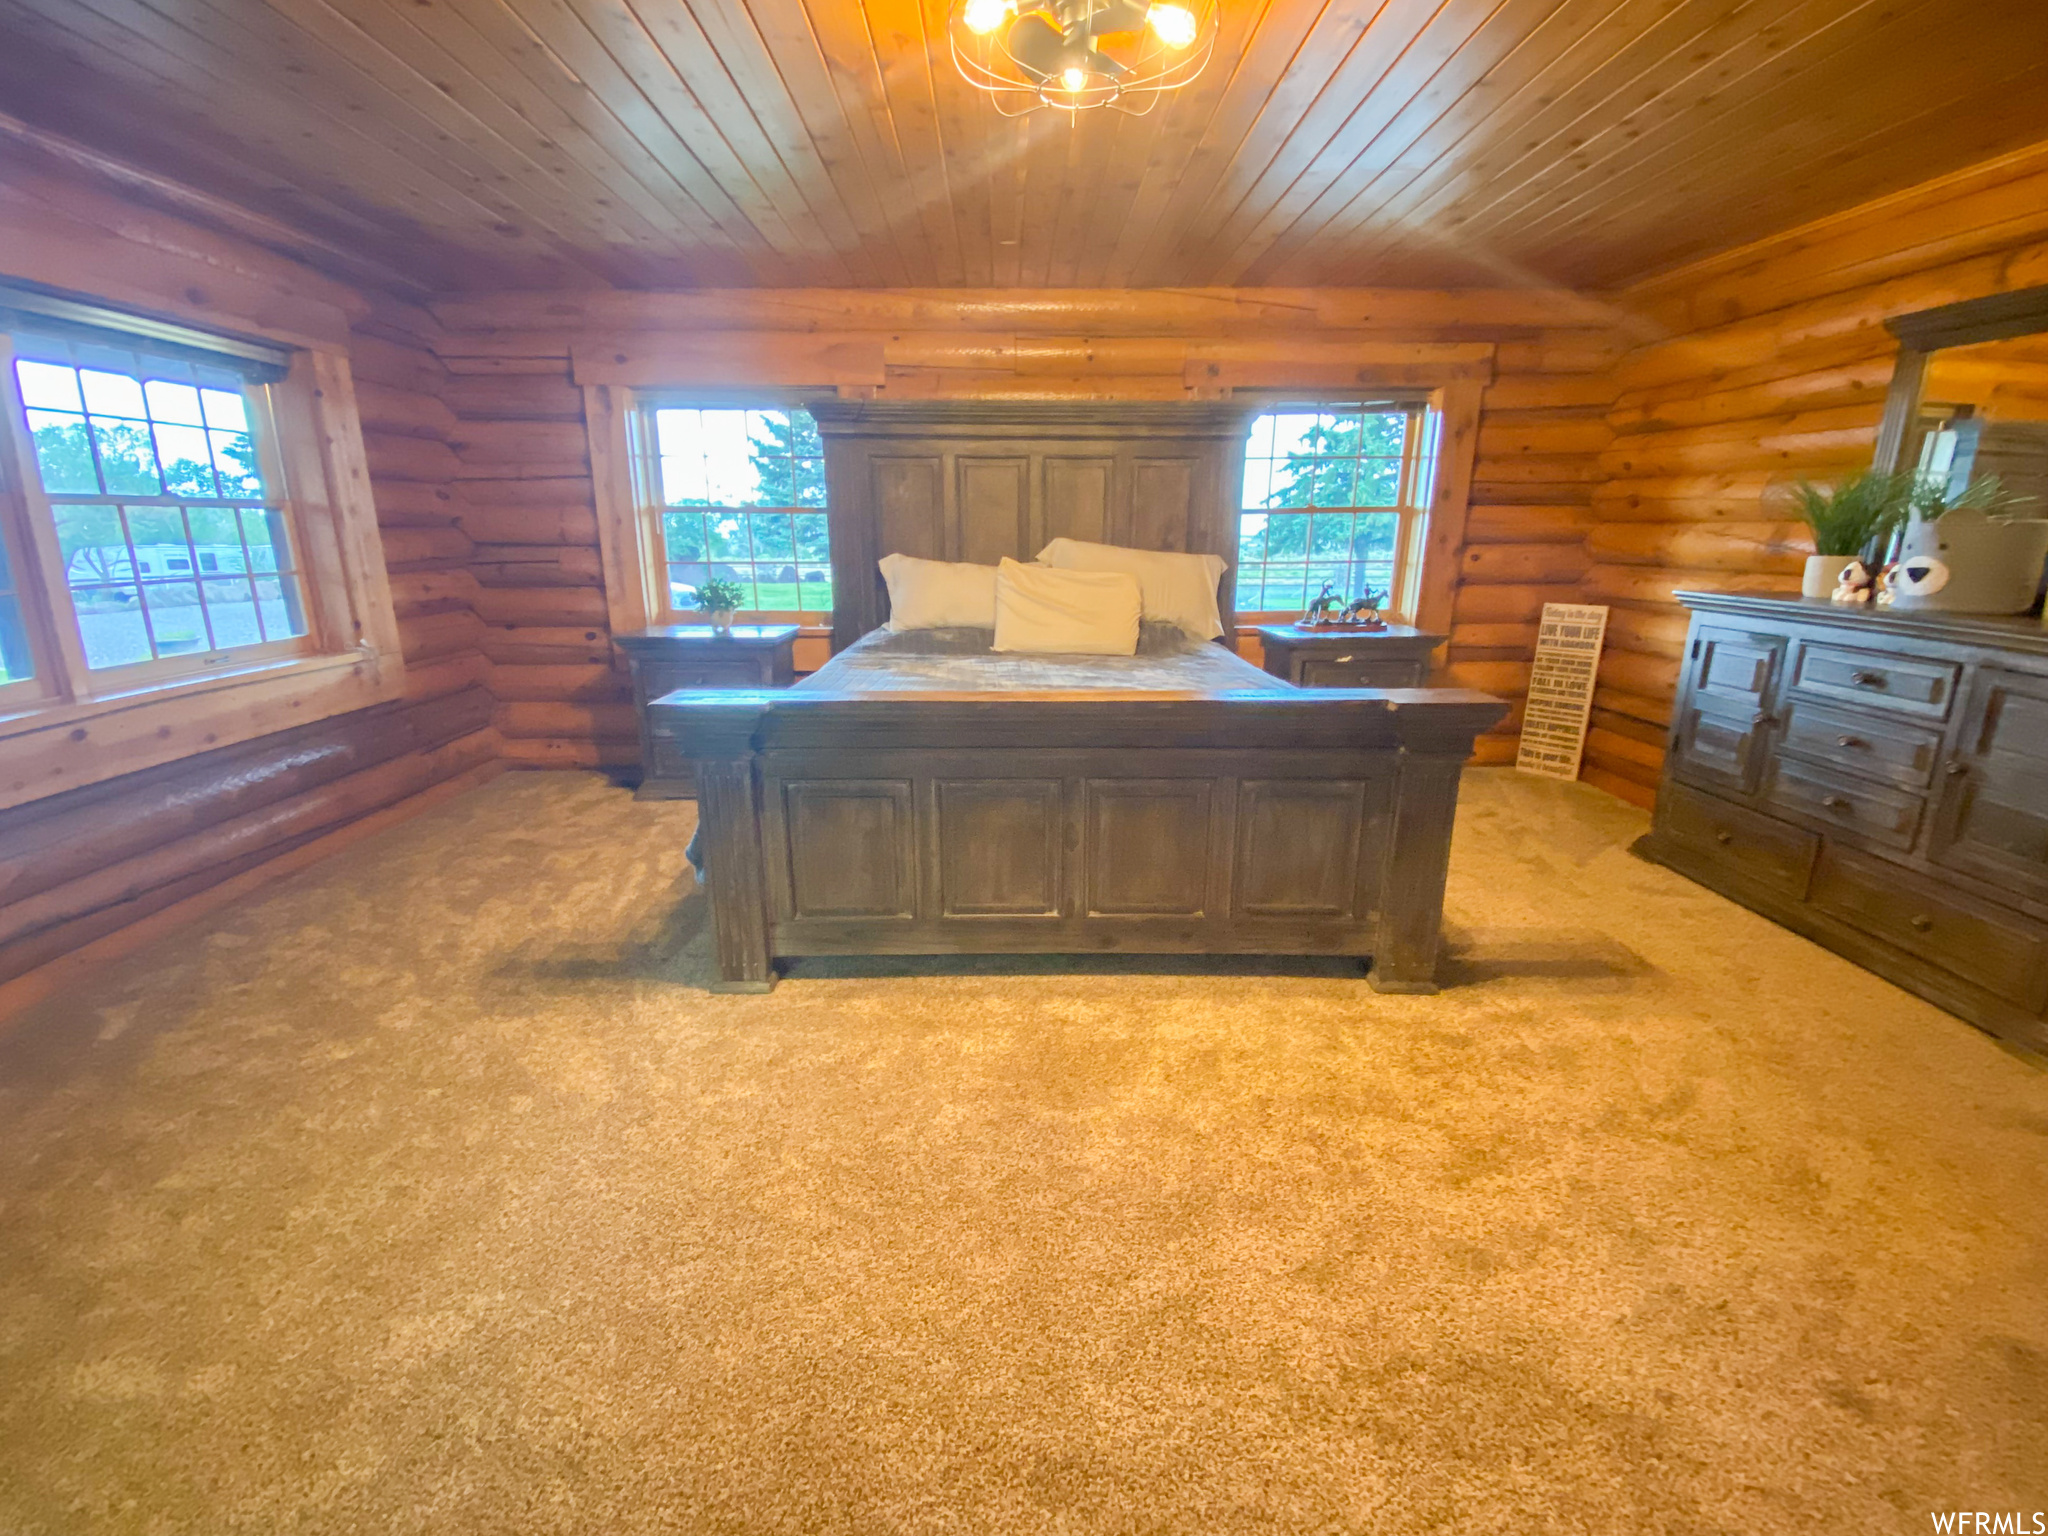 Home office with log walls, light colored carpet, and wooden ceiling